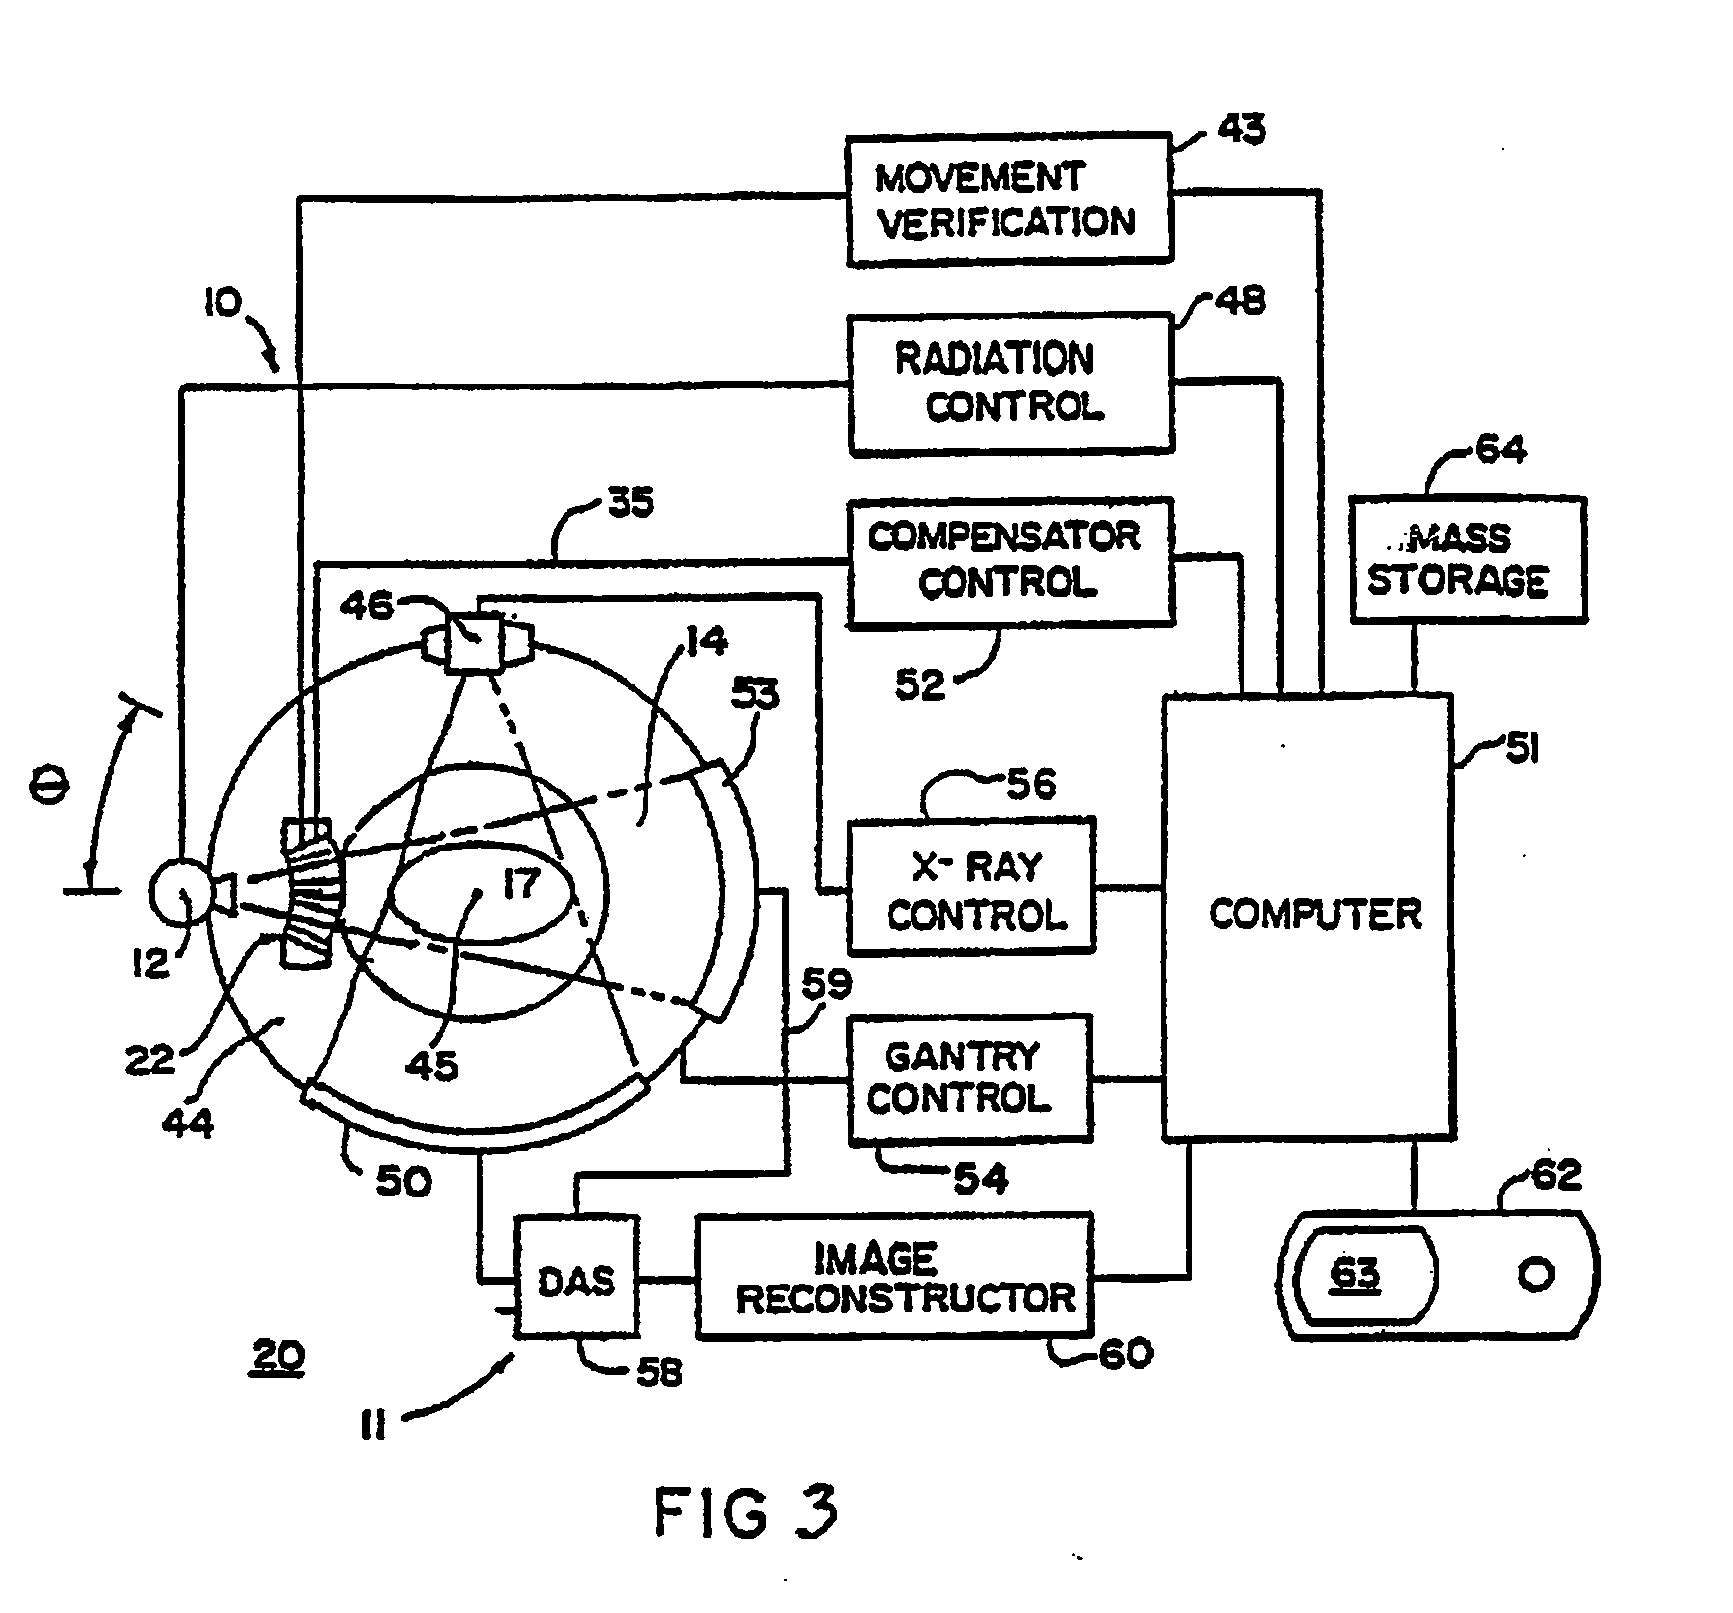 System and method for optimization of a radiation therapy plan in the presence of motion